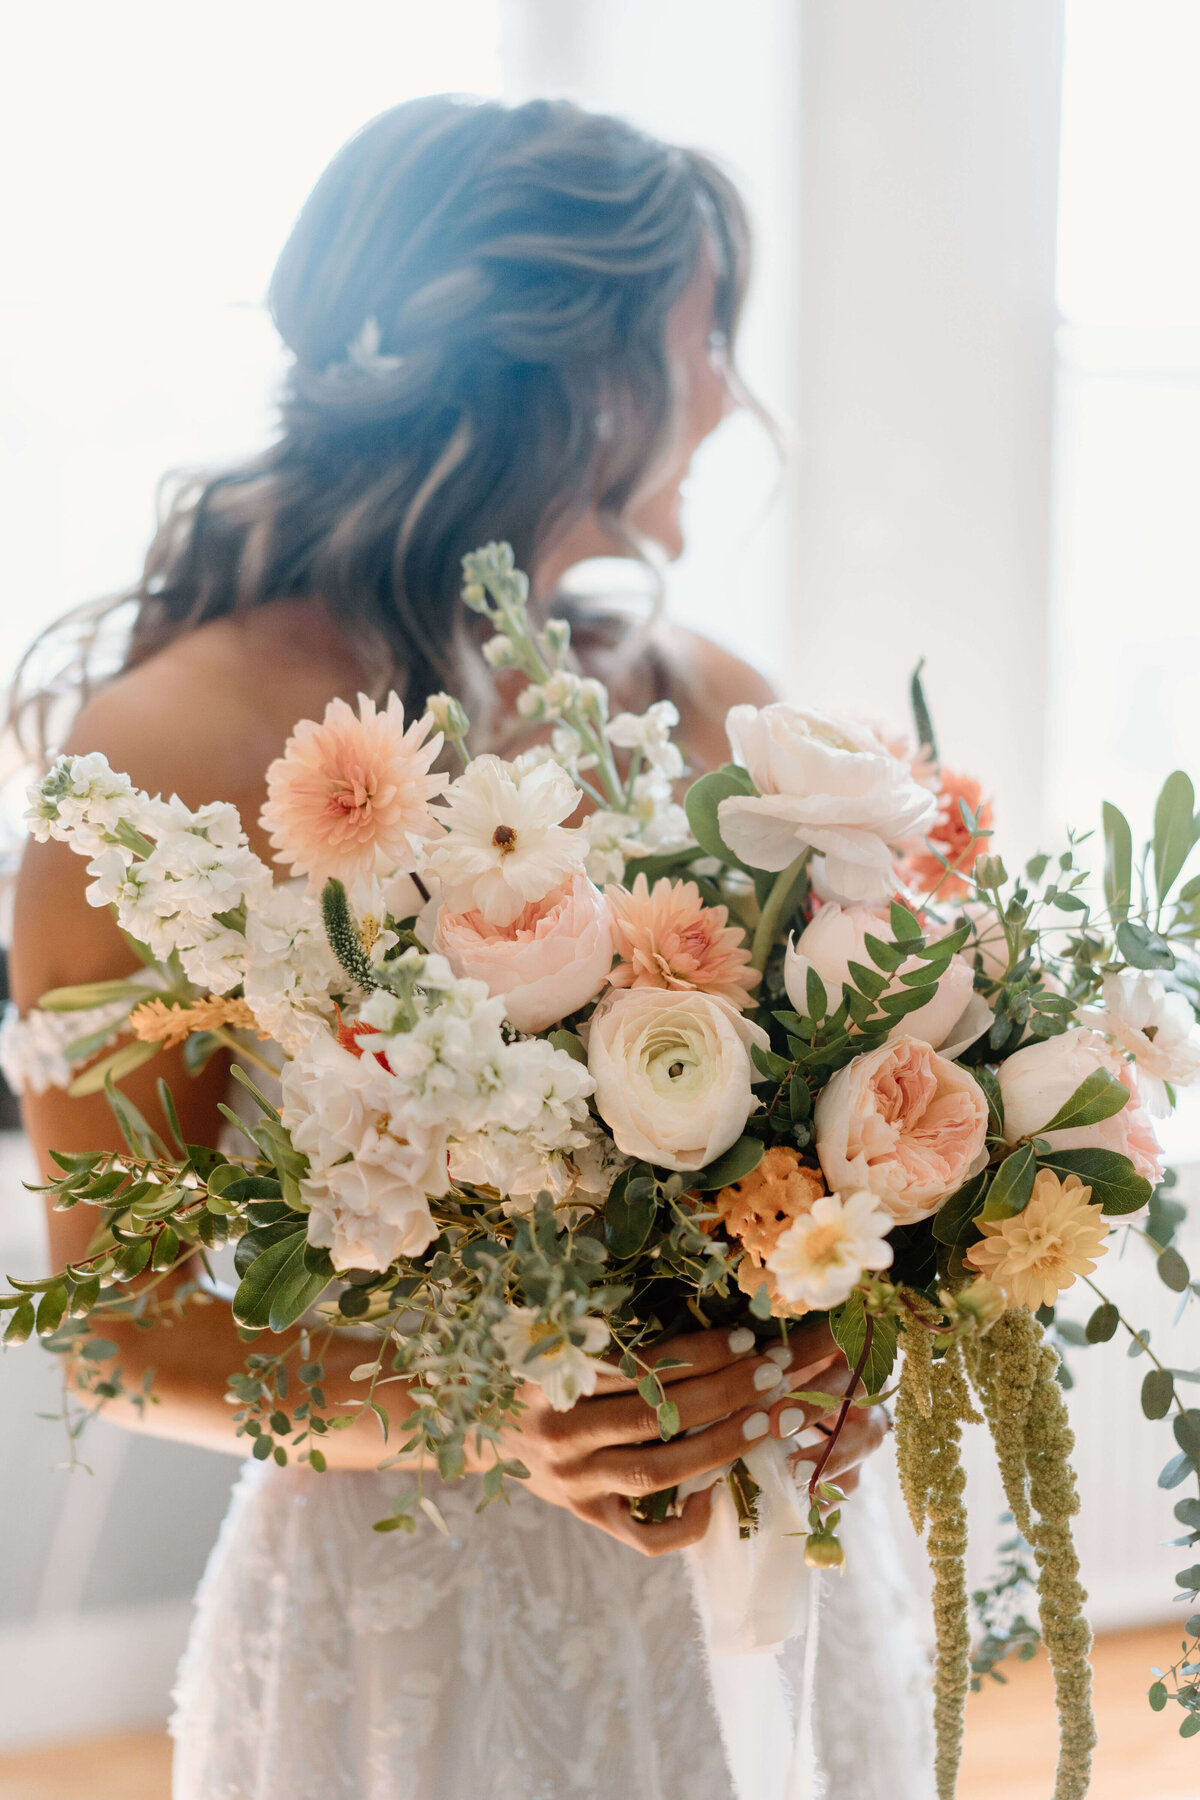 large bridal bouquet with pale orange, white florals and greenery